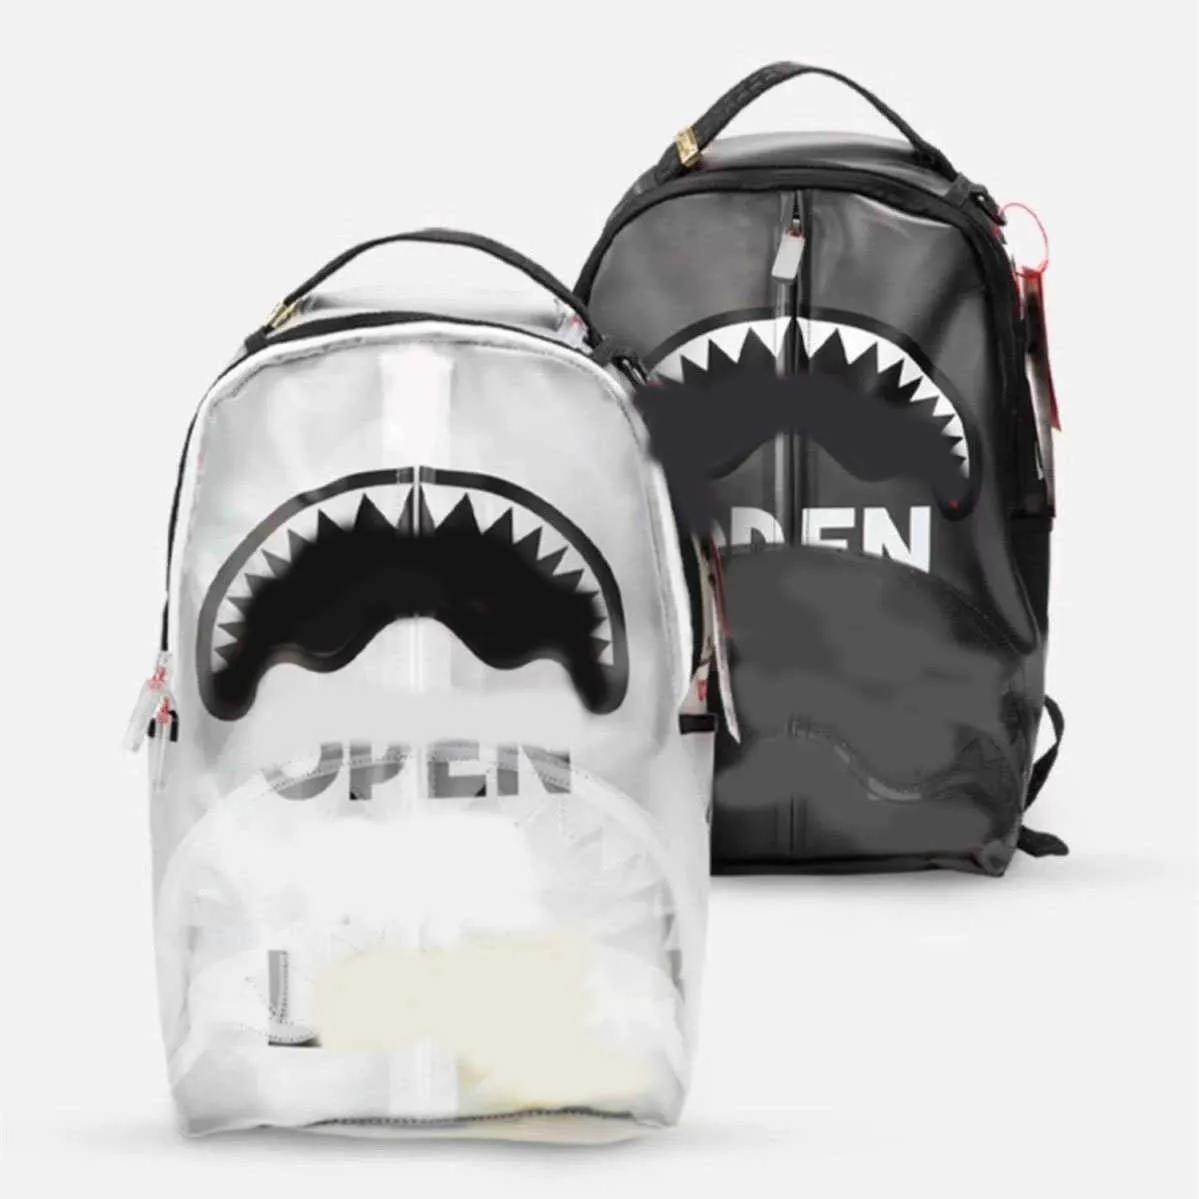 Schoolbag For Male Students, Leisure For High School Students, Backpack For Male Students, Trendy Sports Trend, Cool Backpack